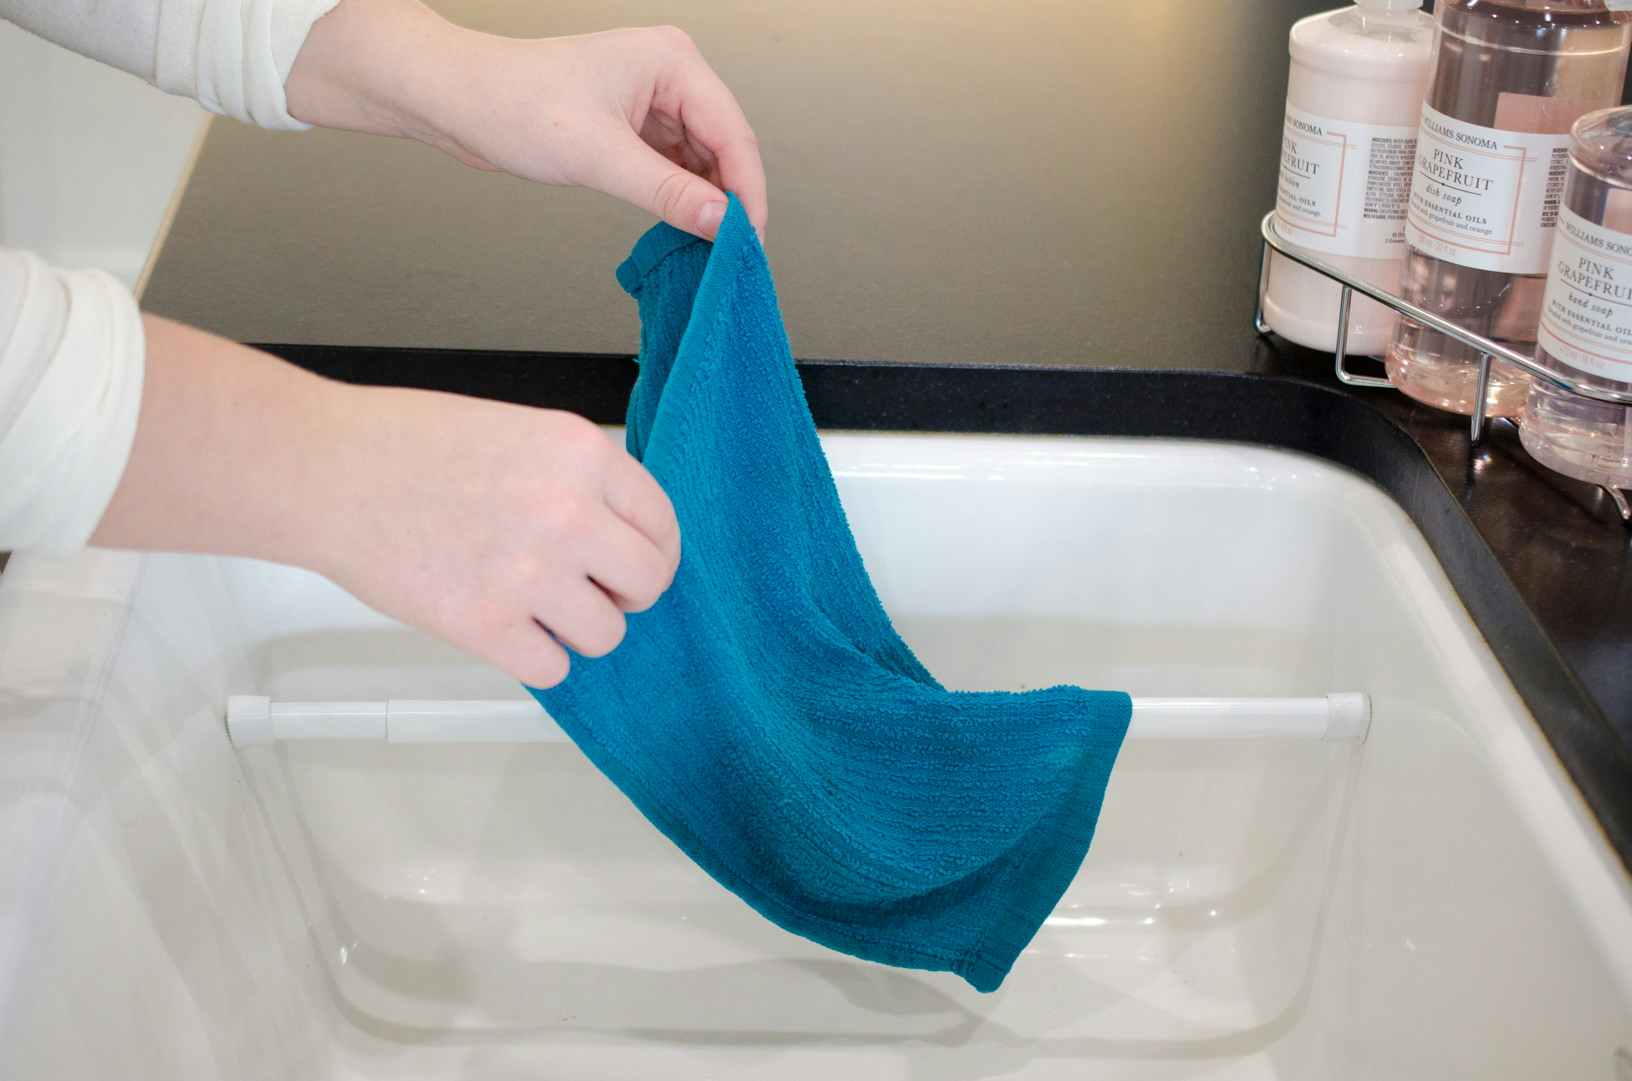 Hang wet dish towels in the sink